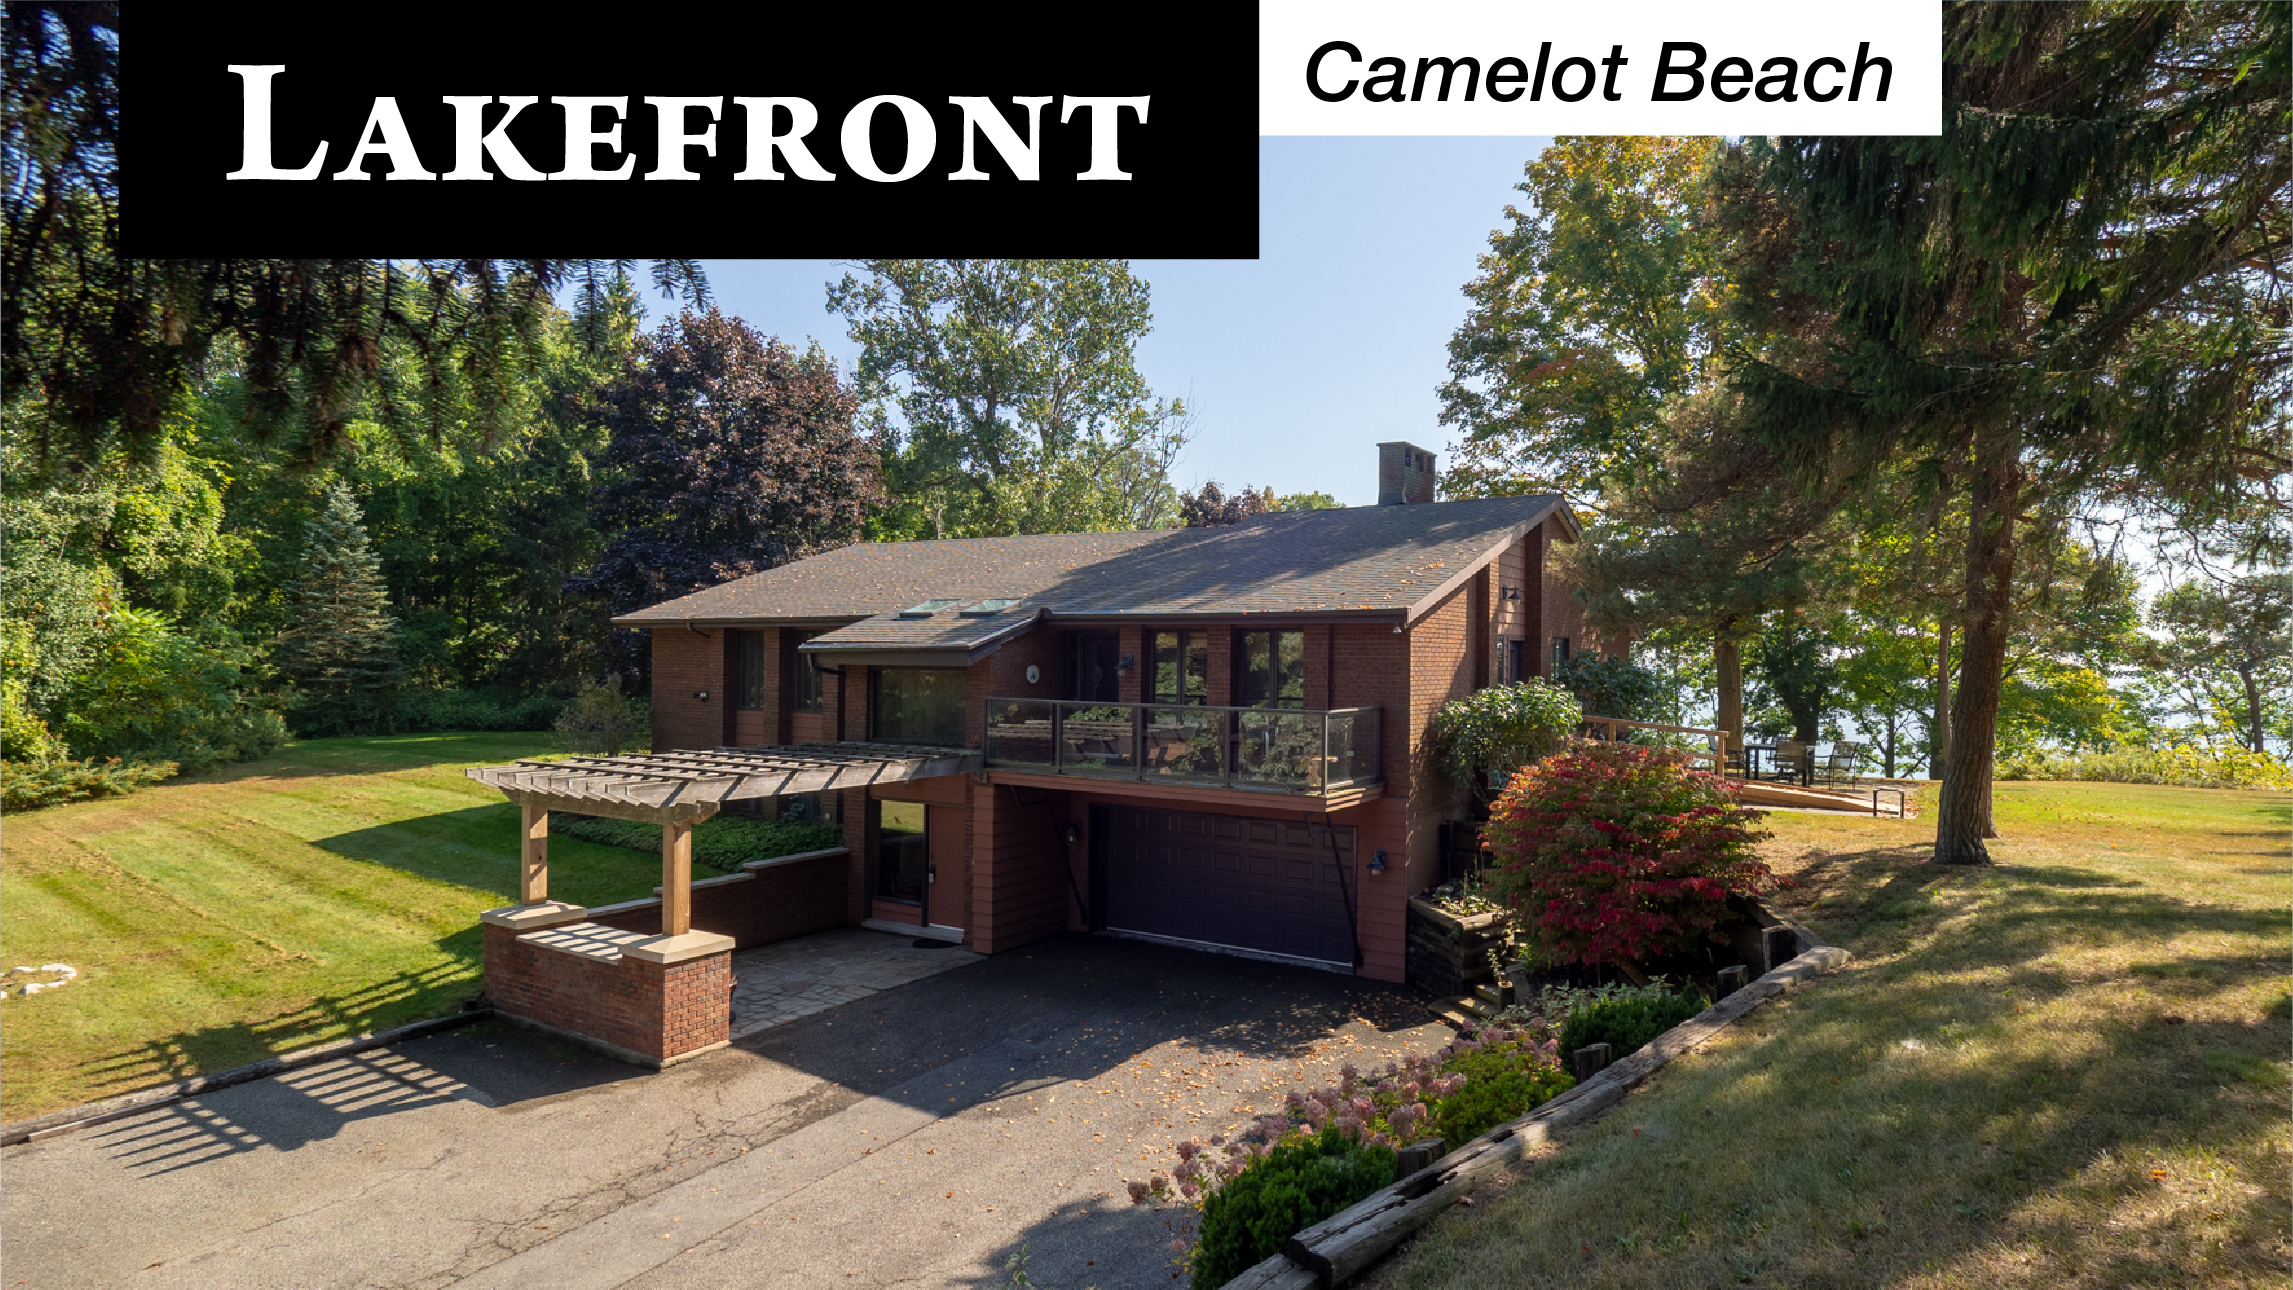 lakefront banner with camelot beach flag on 10201 camelot dr wainfleet for sale by frank ruzycki real estate